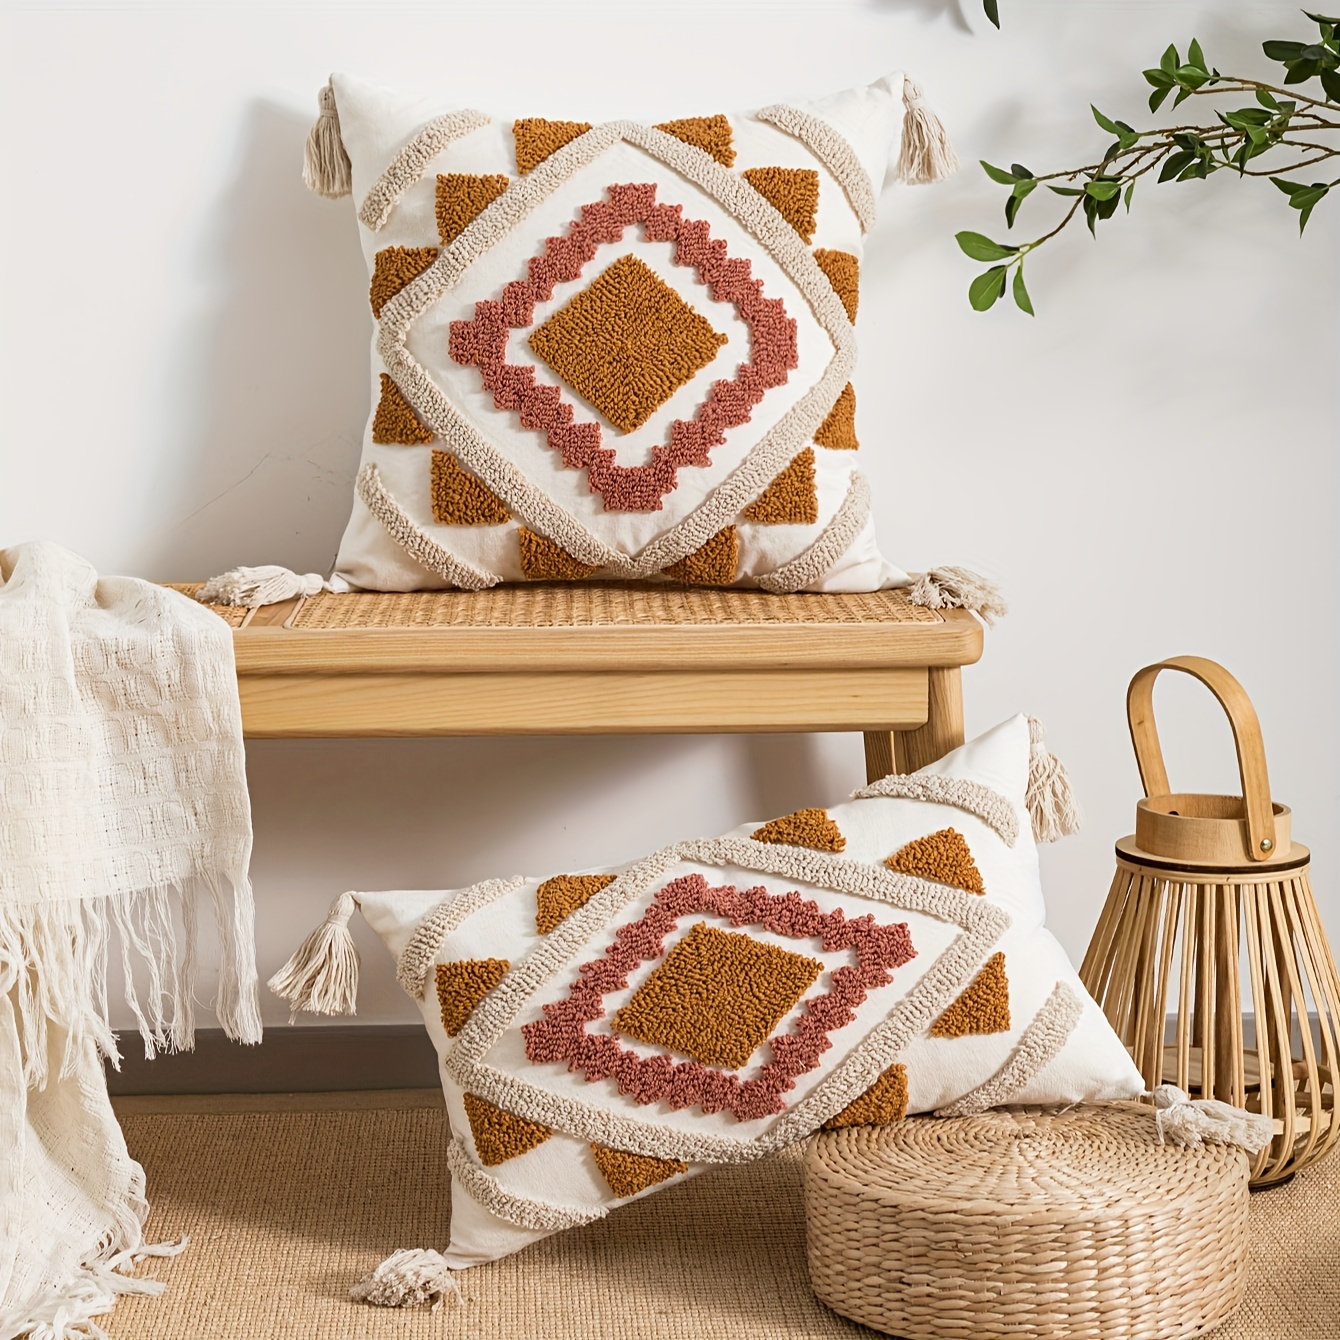 Decorative Pillows, Boho Throw Pillow Covers 18x18 inch Moroccan Rustic Neutral Handwoven Tufted Accents Pillows for Bedroom, Sofa, Chair, Living Room